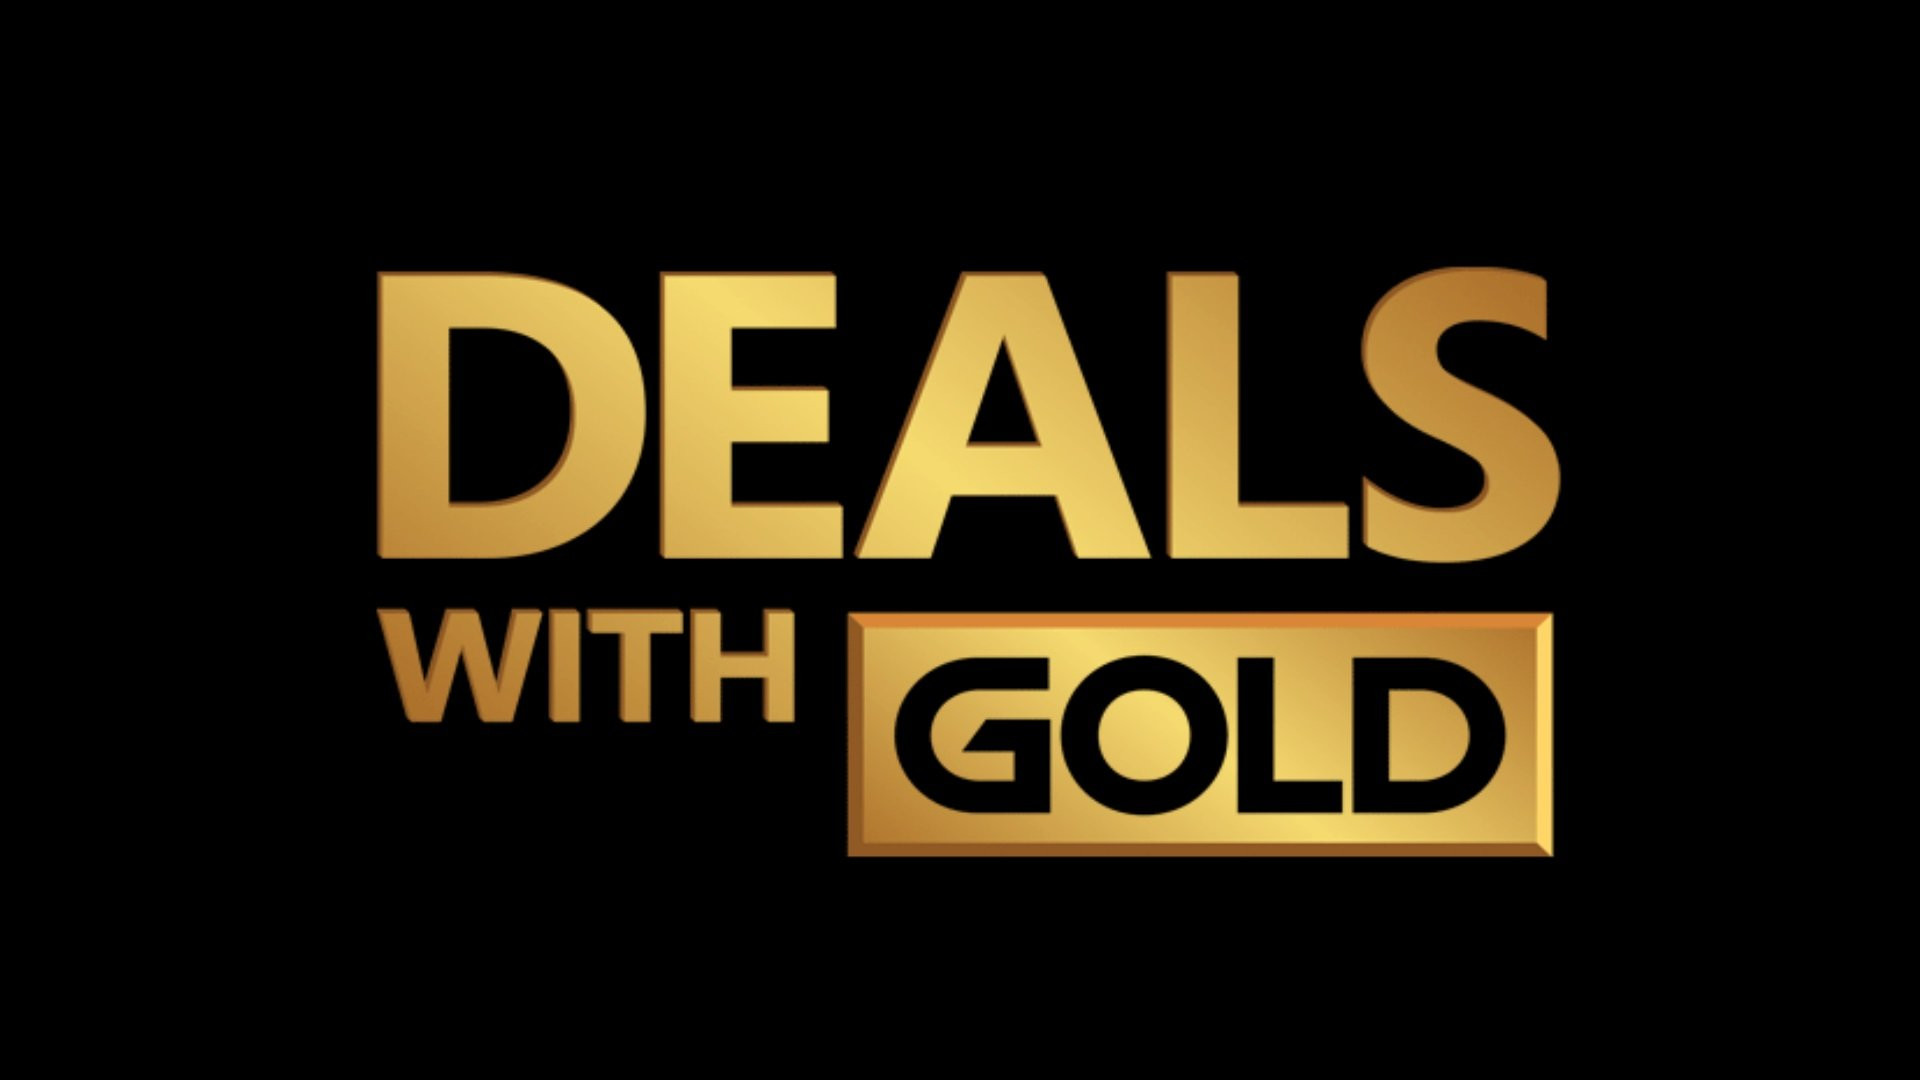 Deals with Gold semaine 47